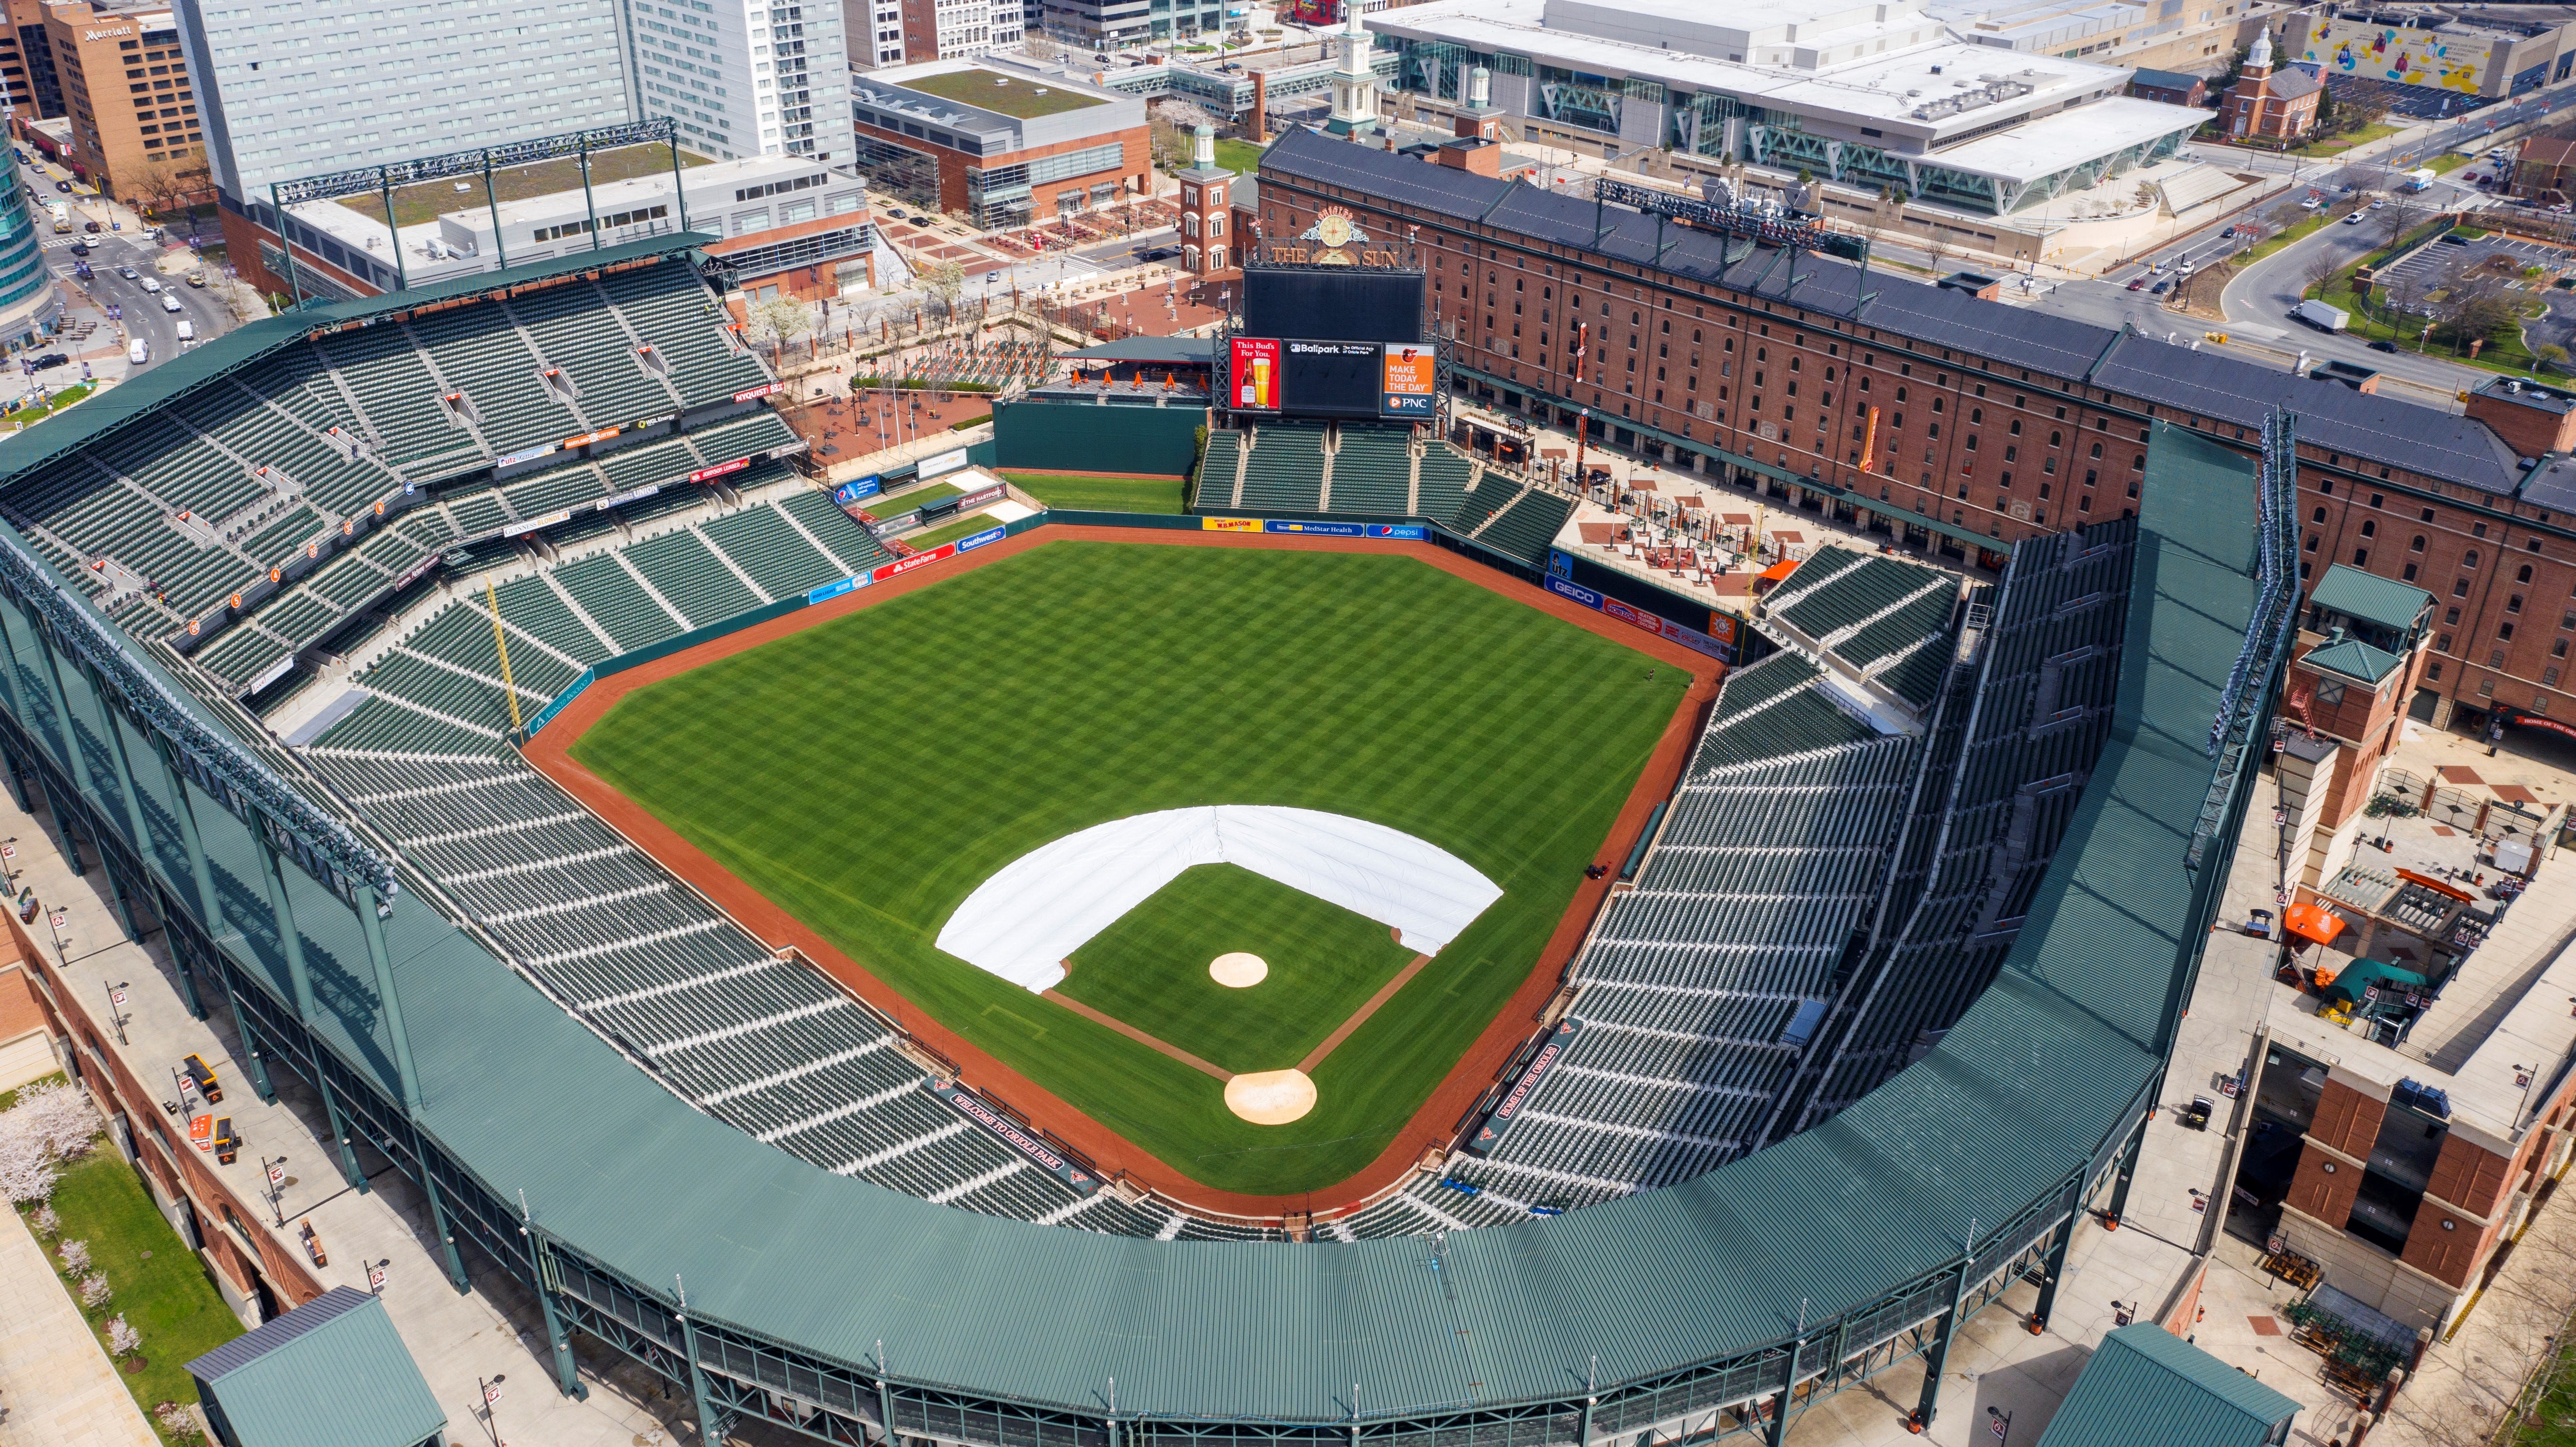 Oriole Park at Camden Yards is shown in a March 26, 2020 file photo. The Baltimore Orioles and the Maryland Stadium Authority have agreed to seek a new lease deal for the stadium.